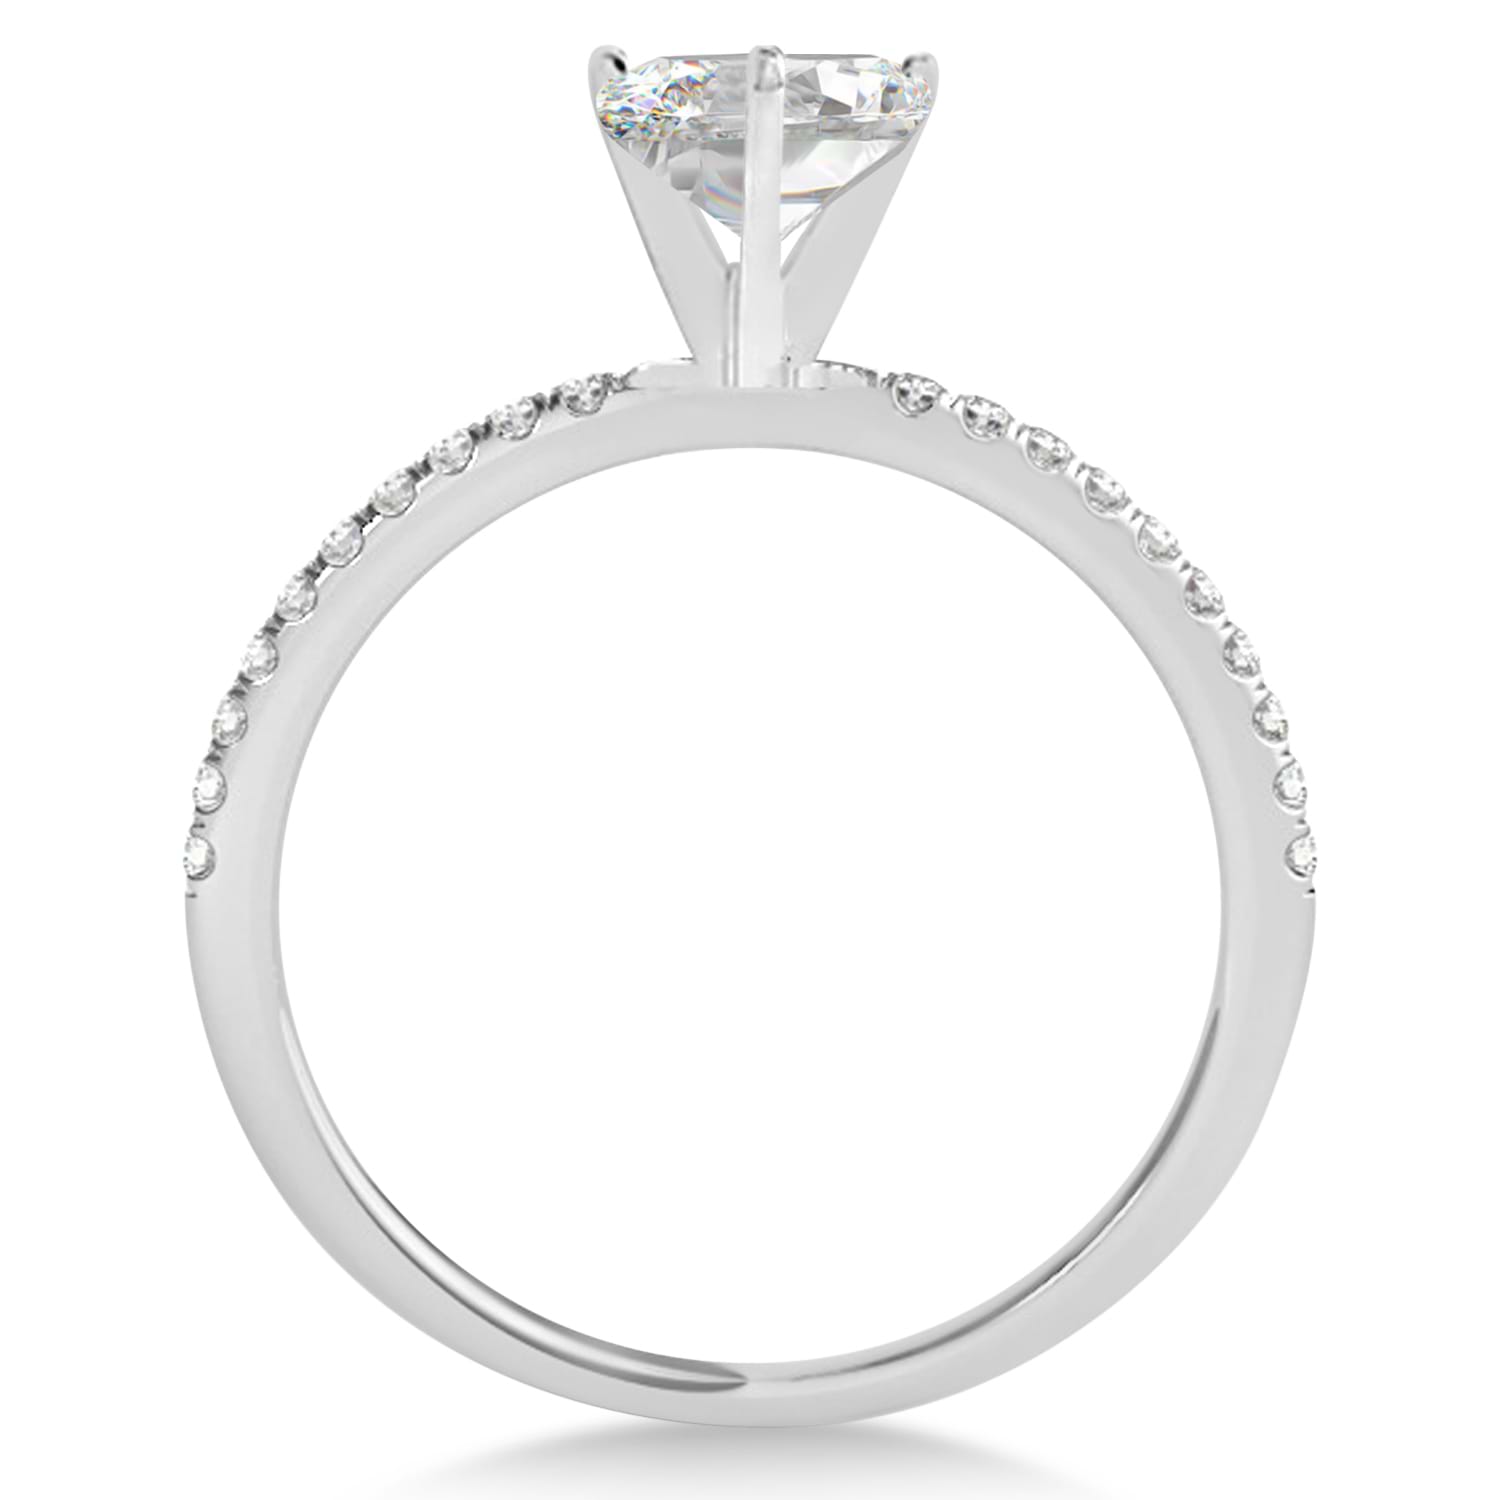 Lab Grown Diamond Accented Oval Shape Engagement Ring 14k White Gold (2.50ct)